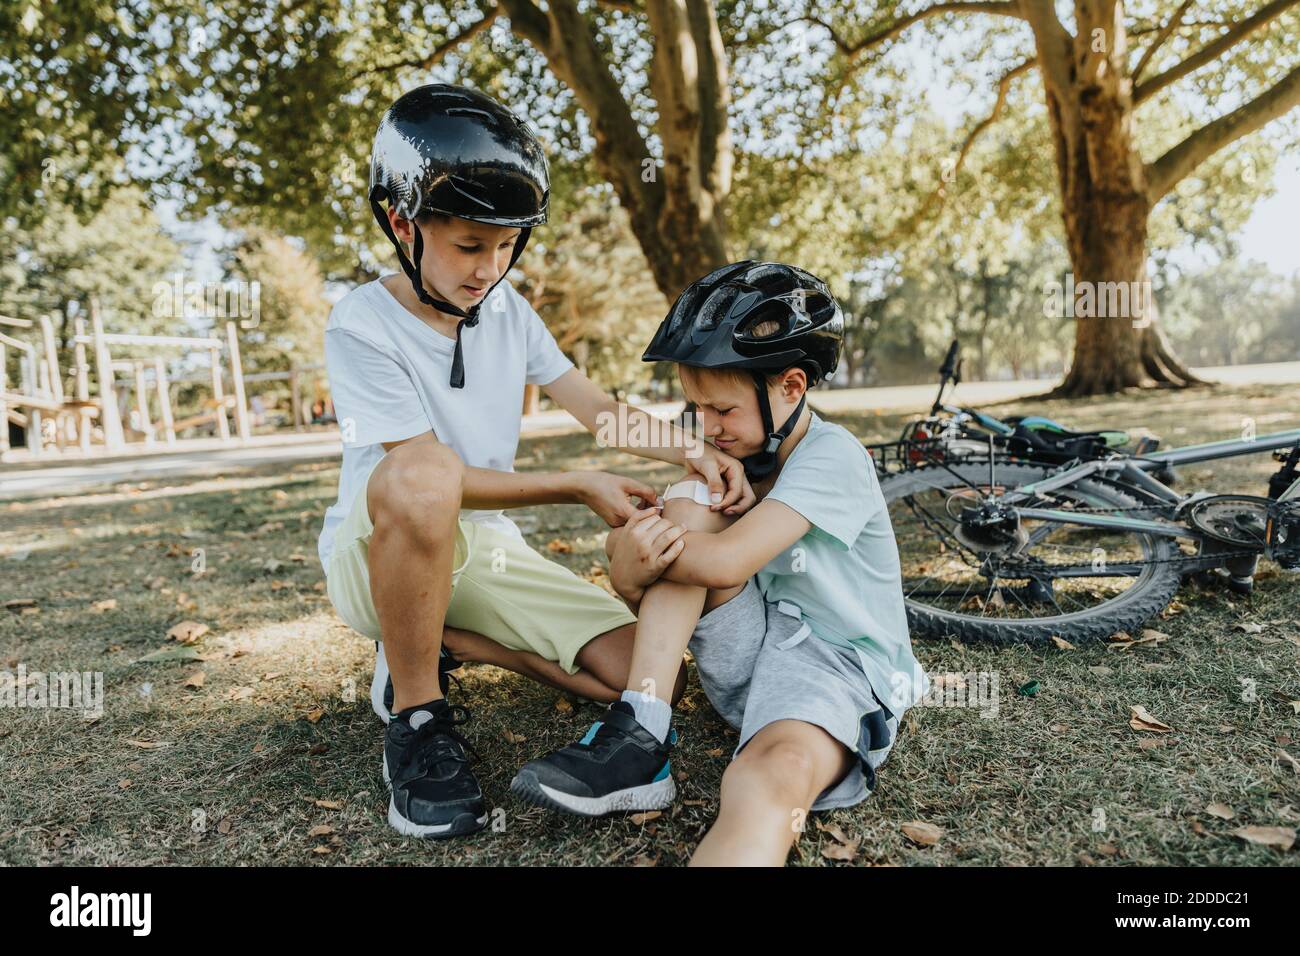 Boy putting bandage on younger brother knee sitting in public park Stock Photo